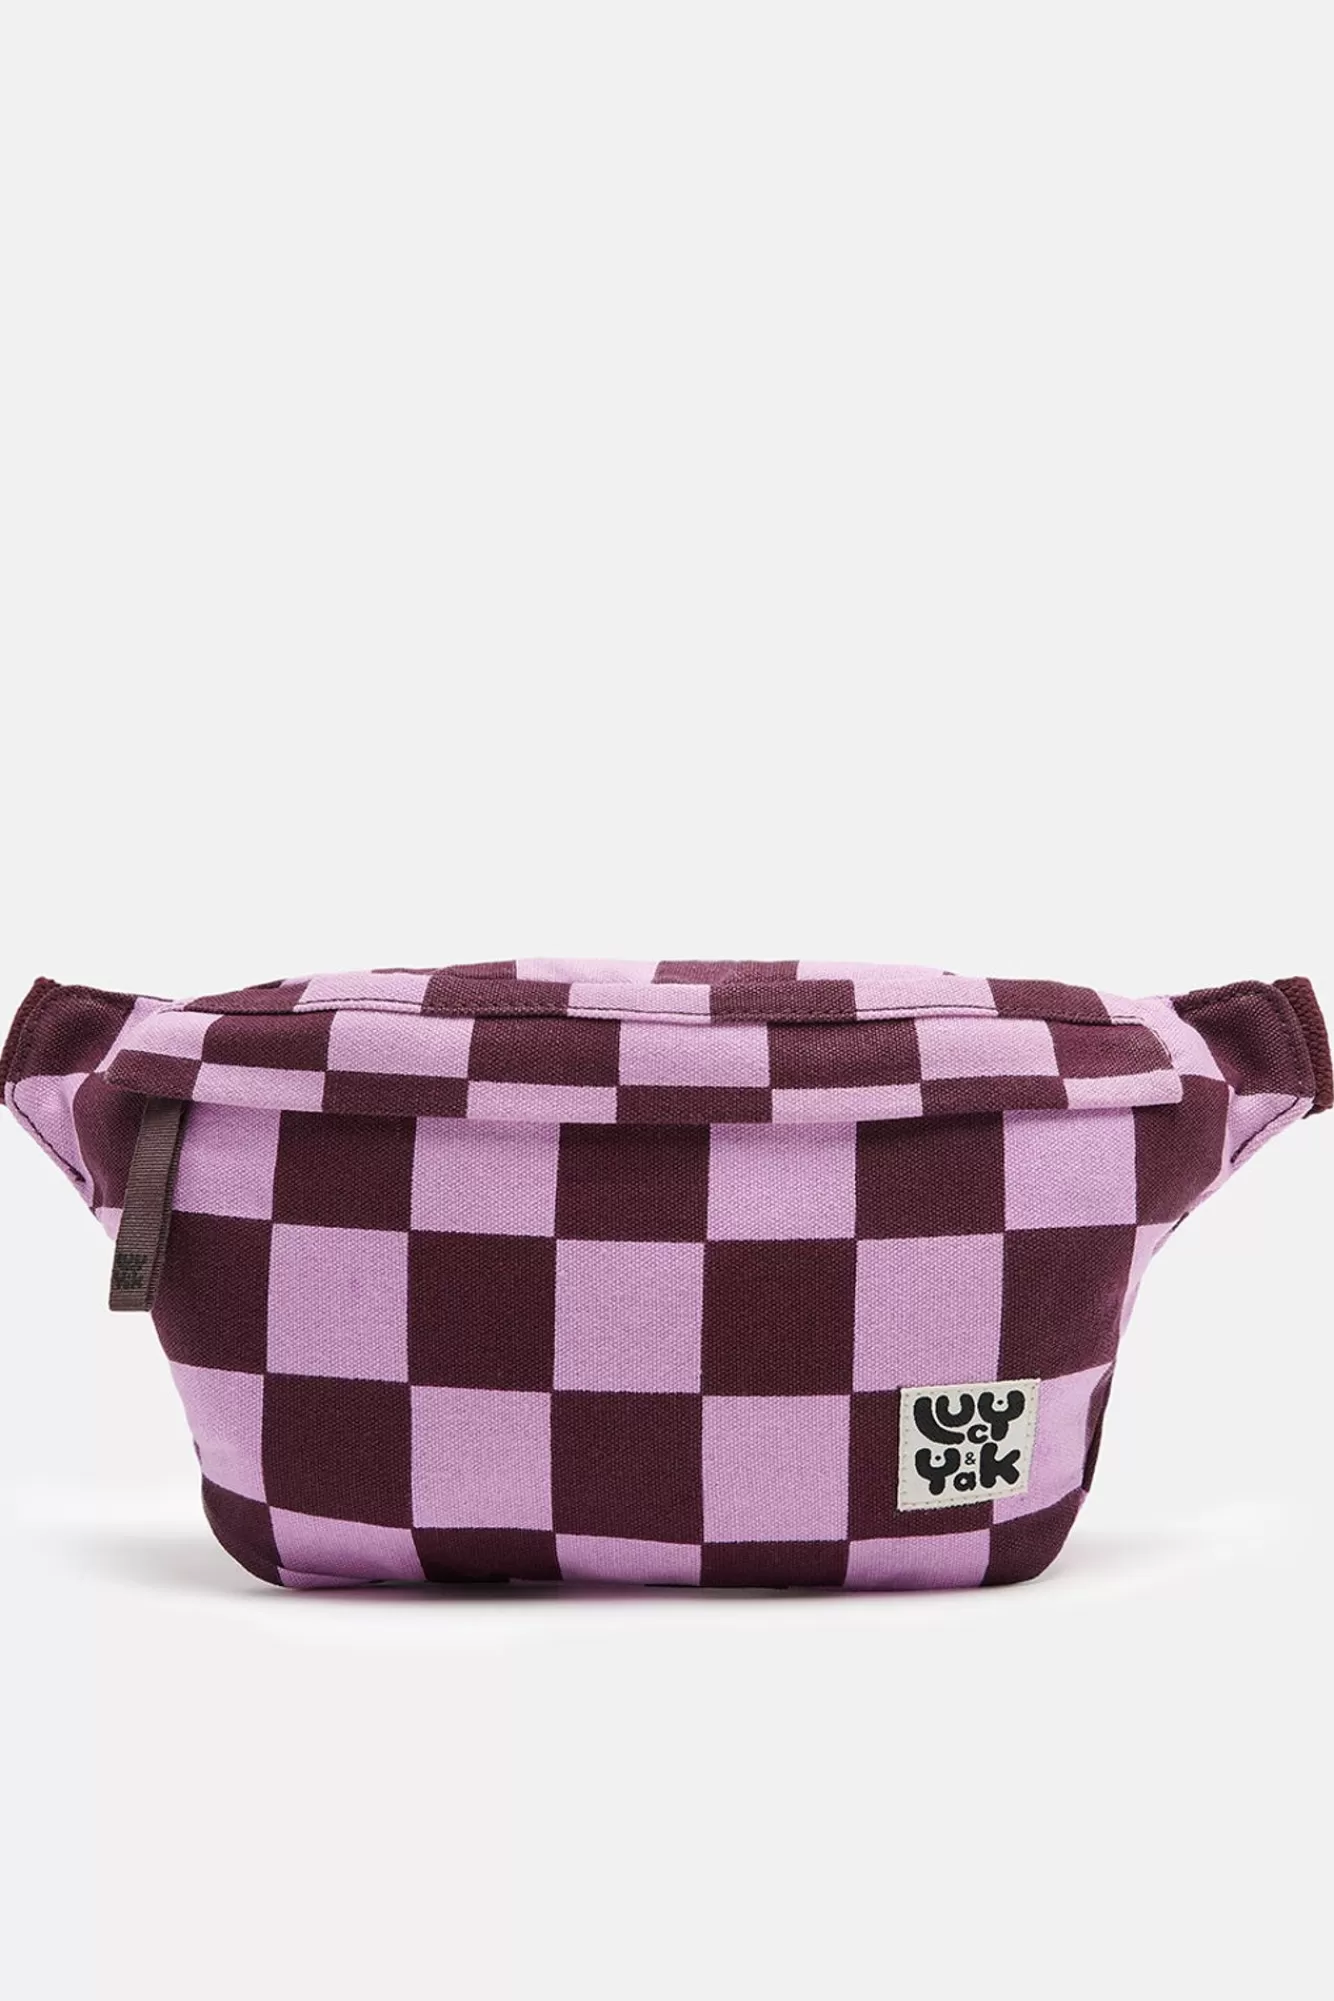 Brodie Bag: Cotton Canvas - Harmon Checkerboard-Lucy & Yak Store